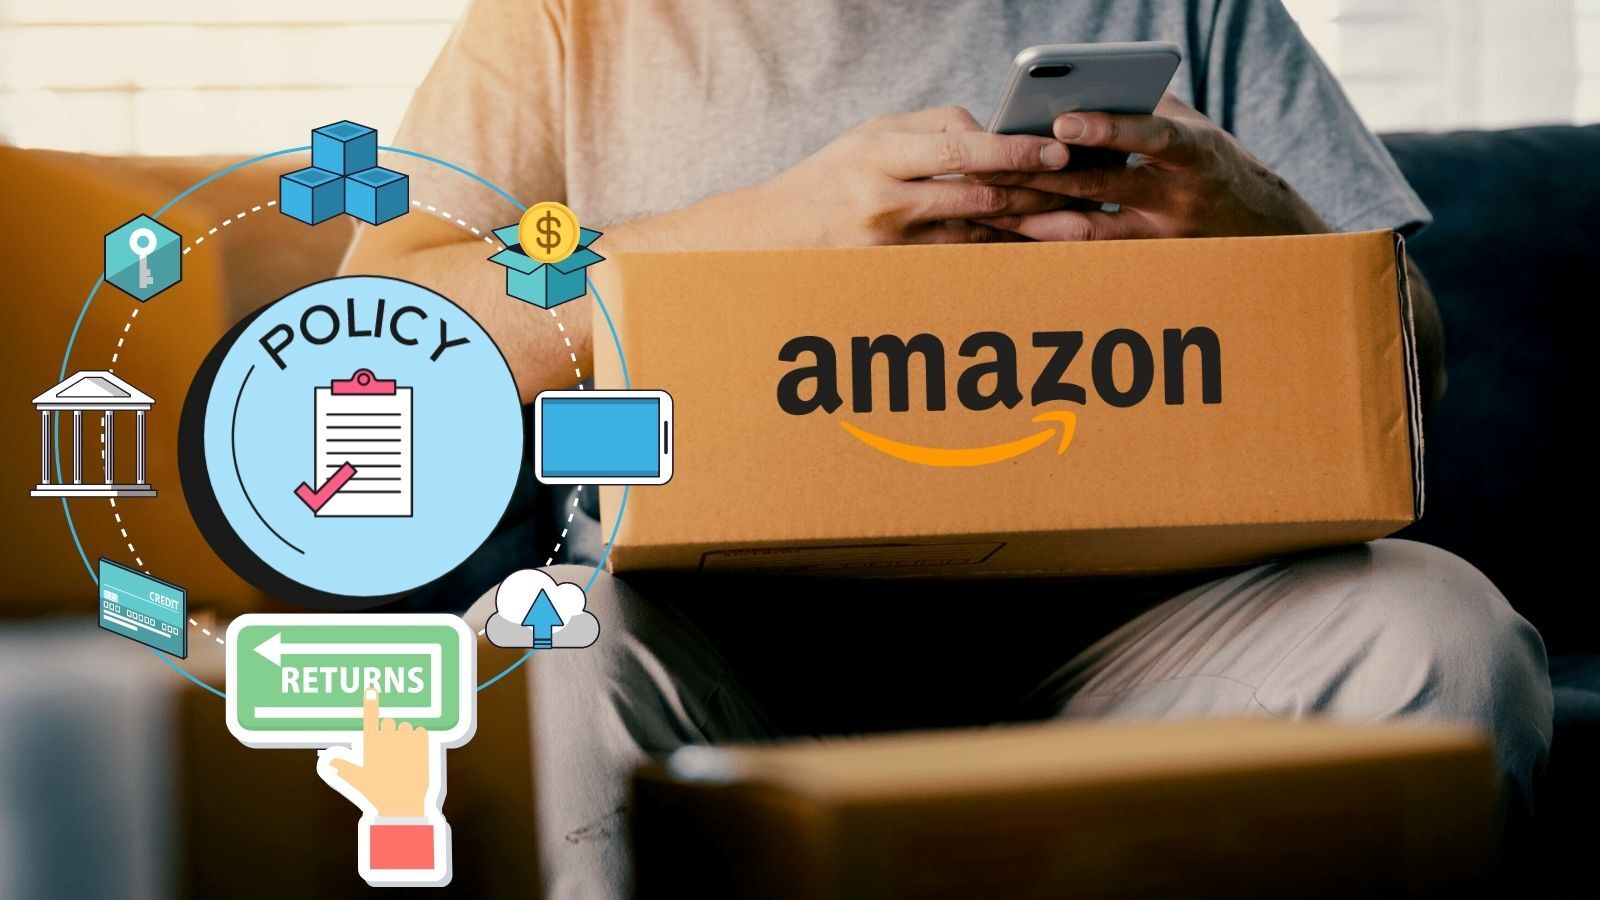 Amazon Marketplace Return Policy (Things You Should Know!)